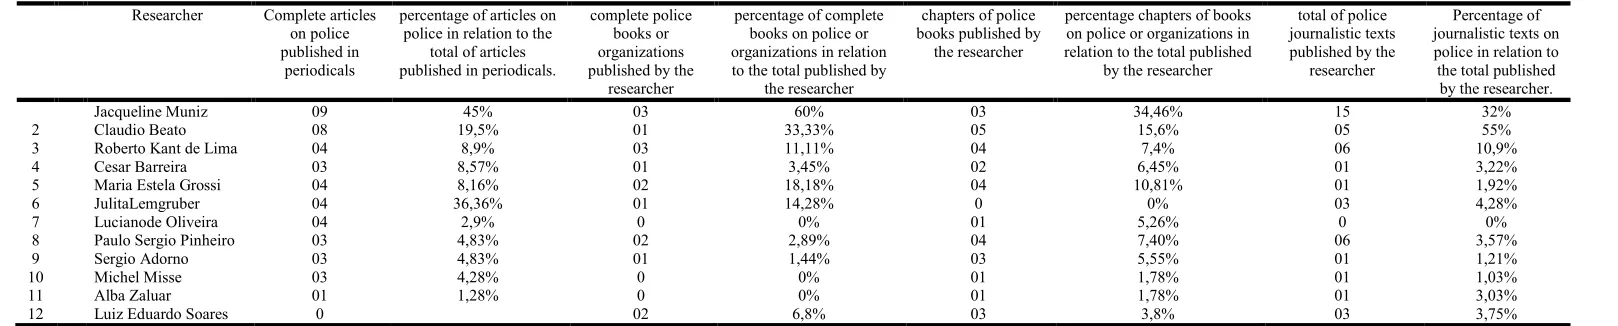 Table  3. Intellectual production on police studies of pioneer researchers in the area of crime, violence, public security and criminal justice,  according to Lima, Ratton (2011) plus the production of the researcher Jacqueline Muniz